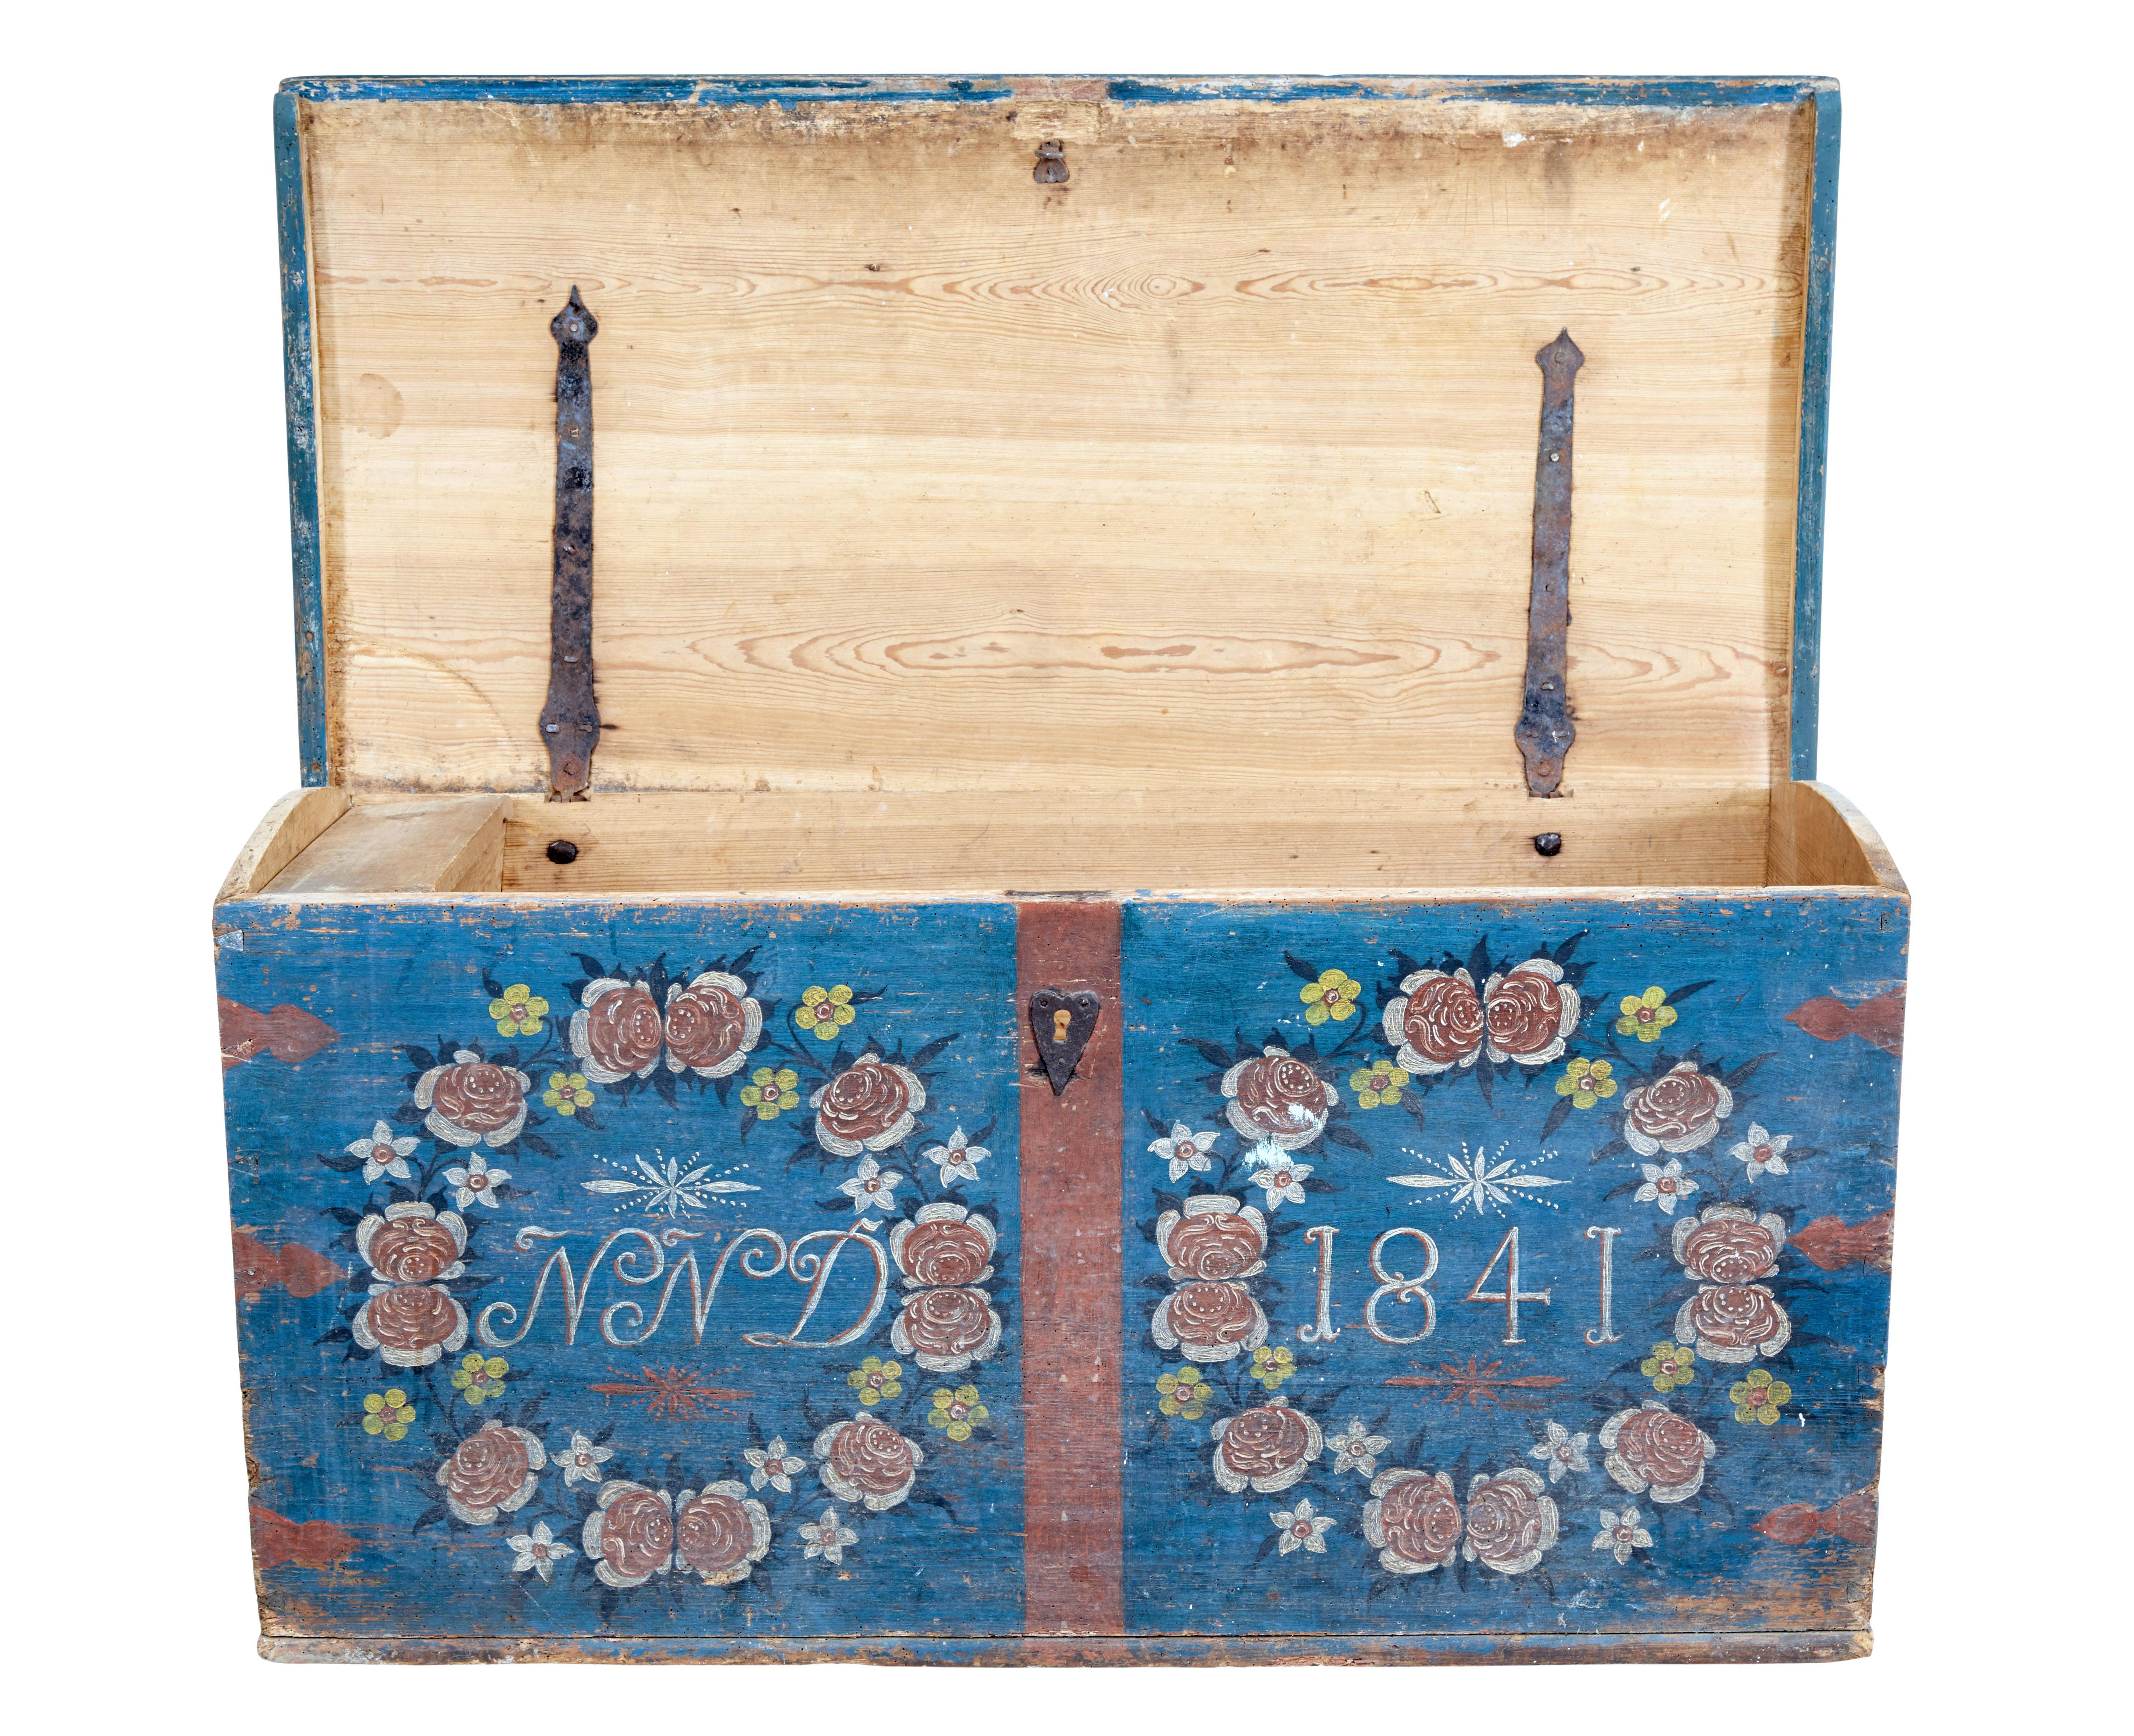 Mid 19th century Swedish folk art hand painted pine coffer circa 1841.

Fine quality piece of Scandinavian folk art.  Made from solid pine with a slight dome top lid.  Base coated in a blue/green scheme with initialed front and dated 1841.  Original